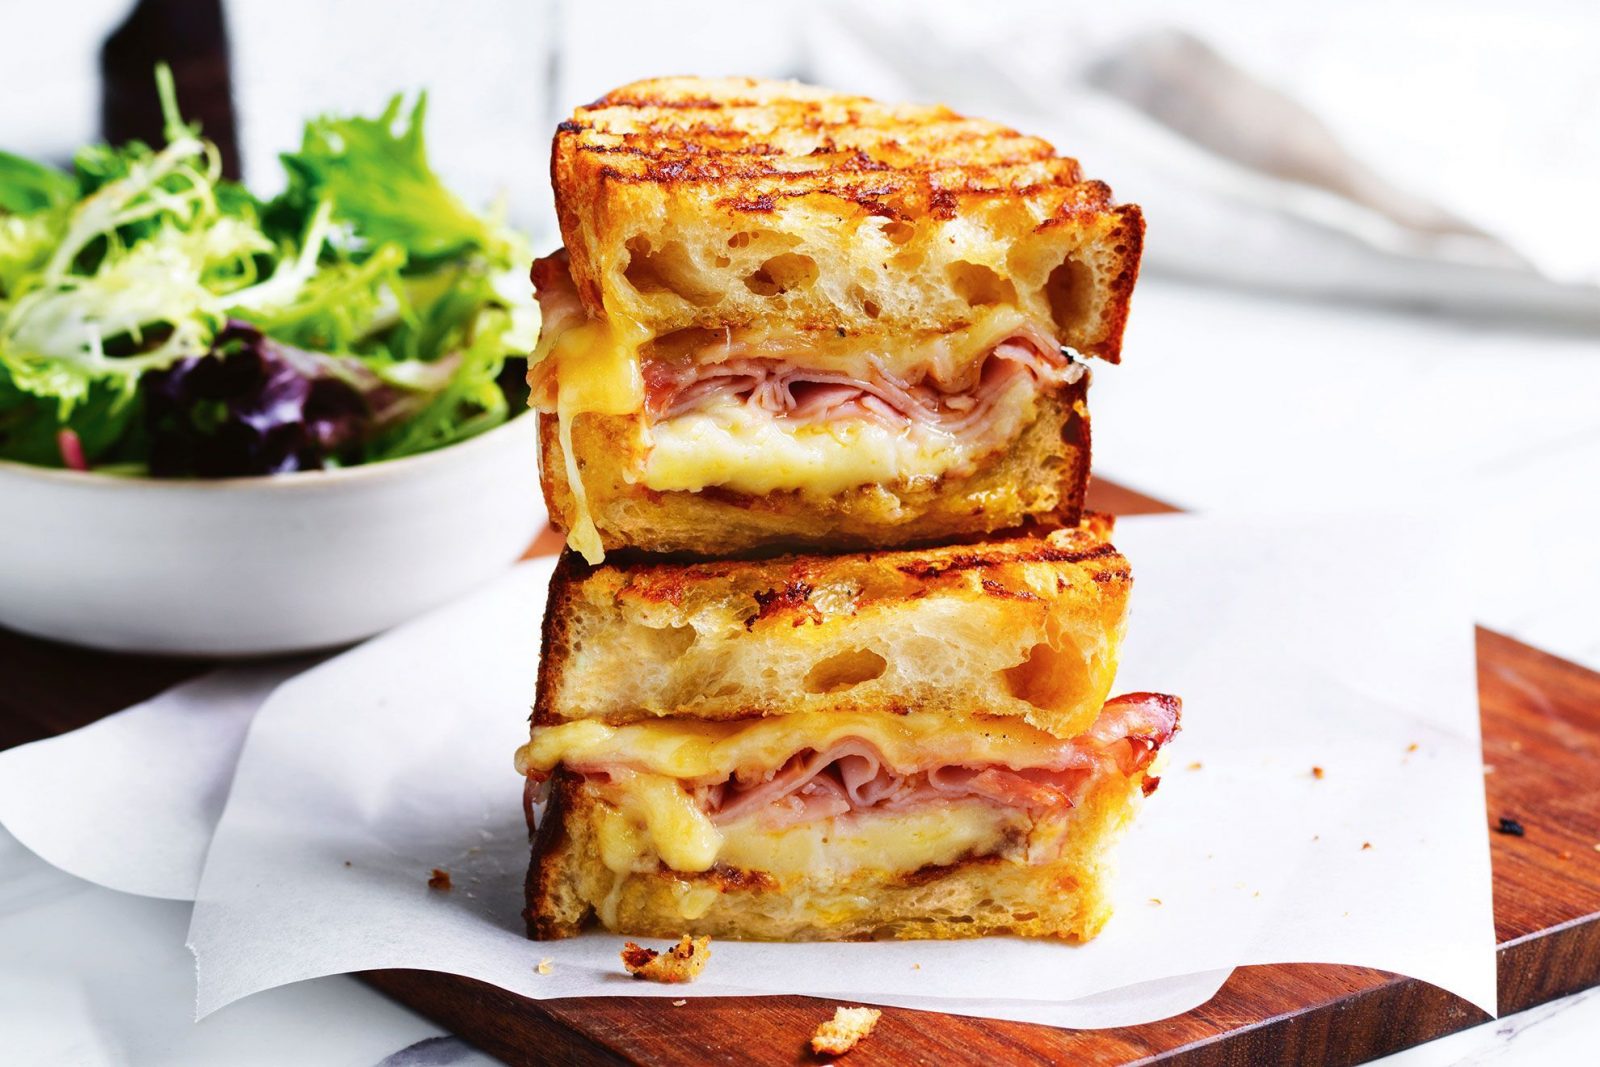 If You Can Pass This General Knowledge Test on Your First Try, You’re Undoubtedly Way Too Smart Croque monsieur